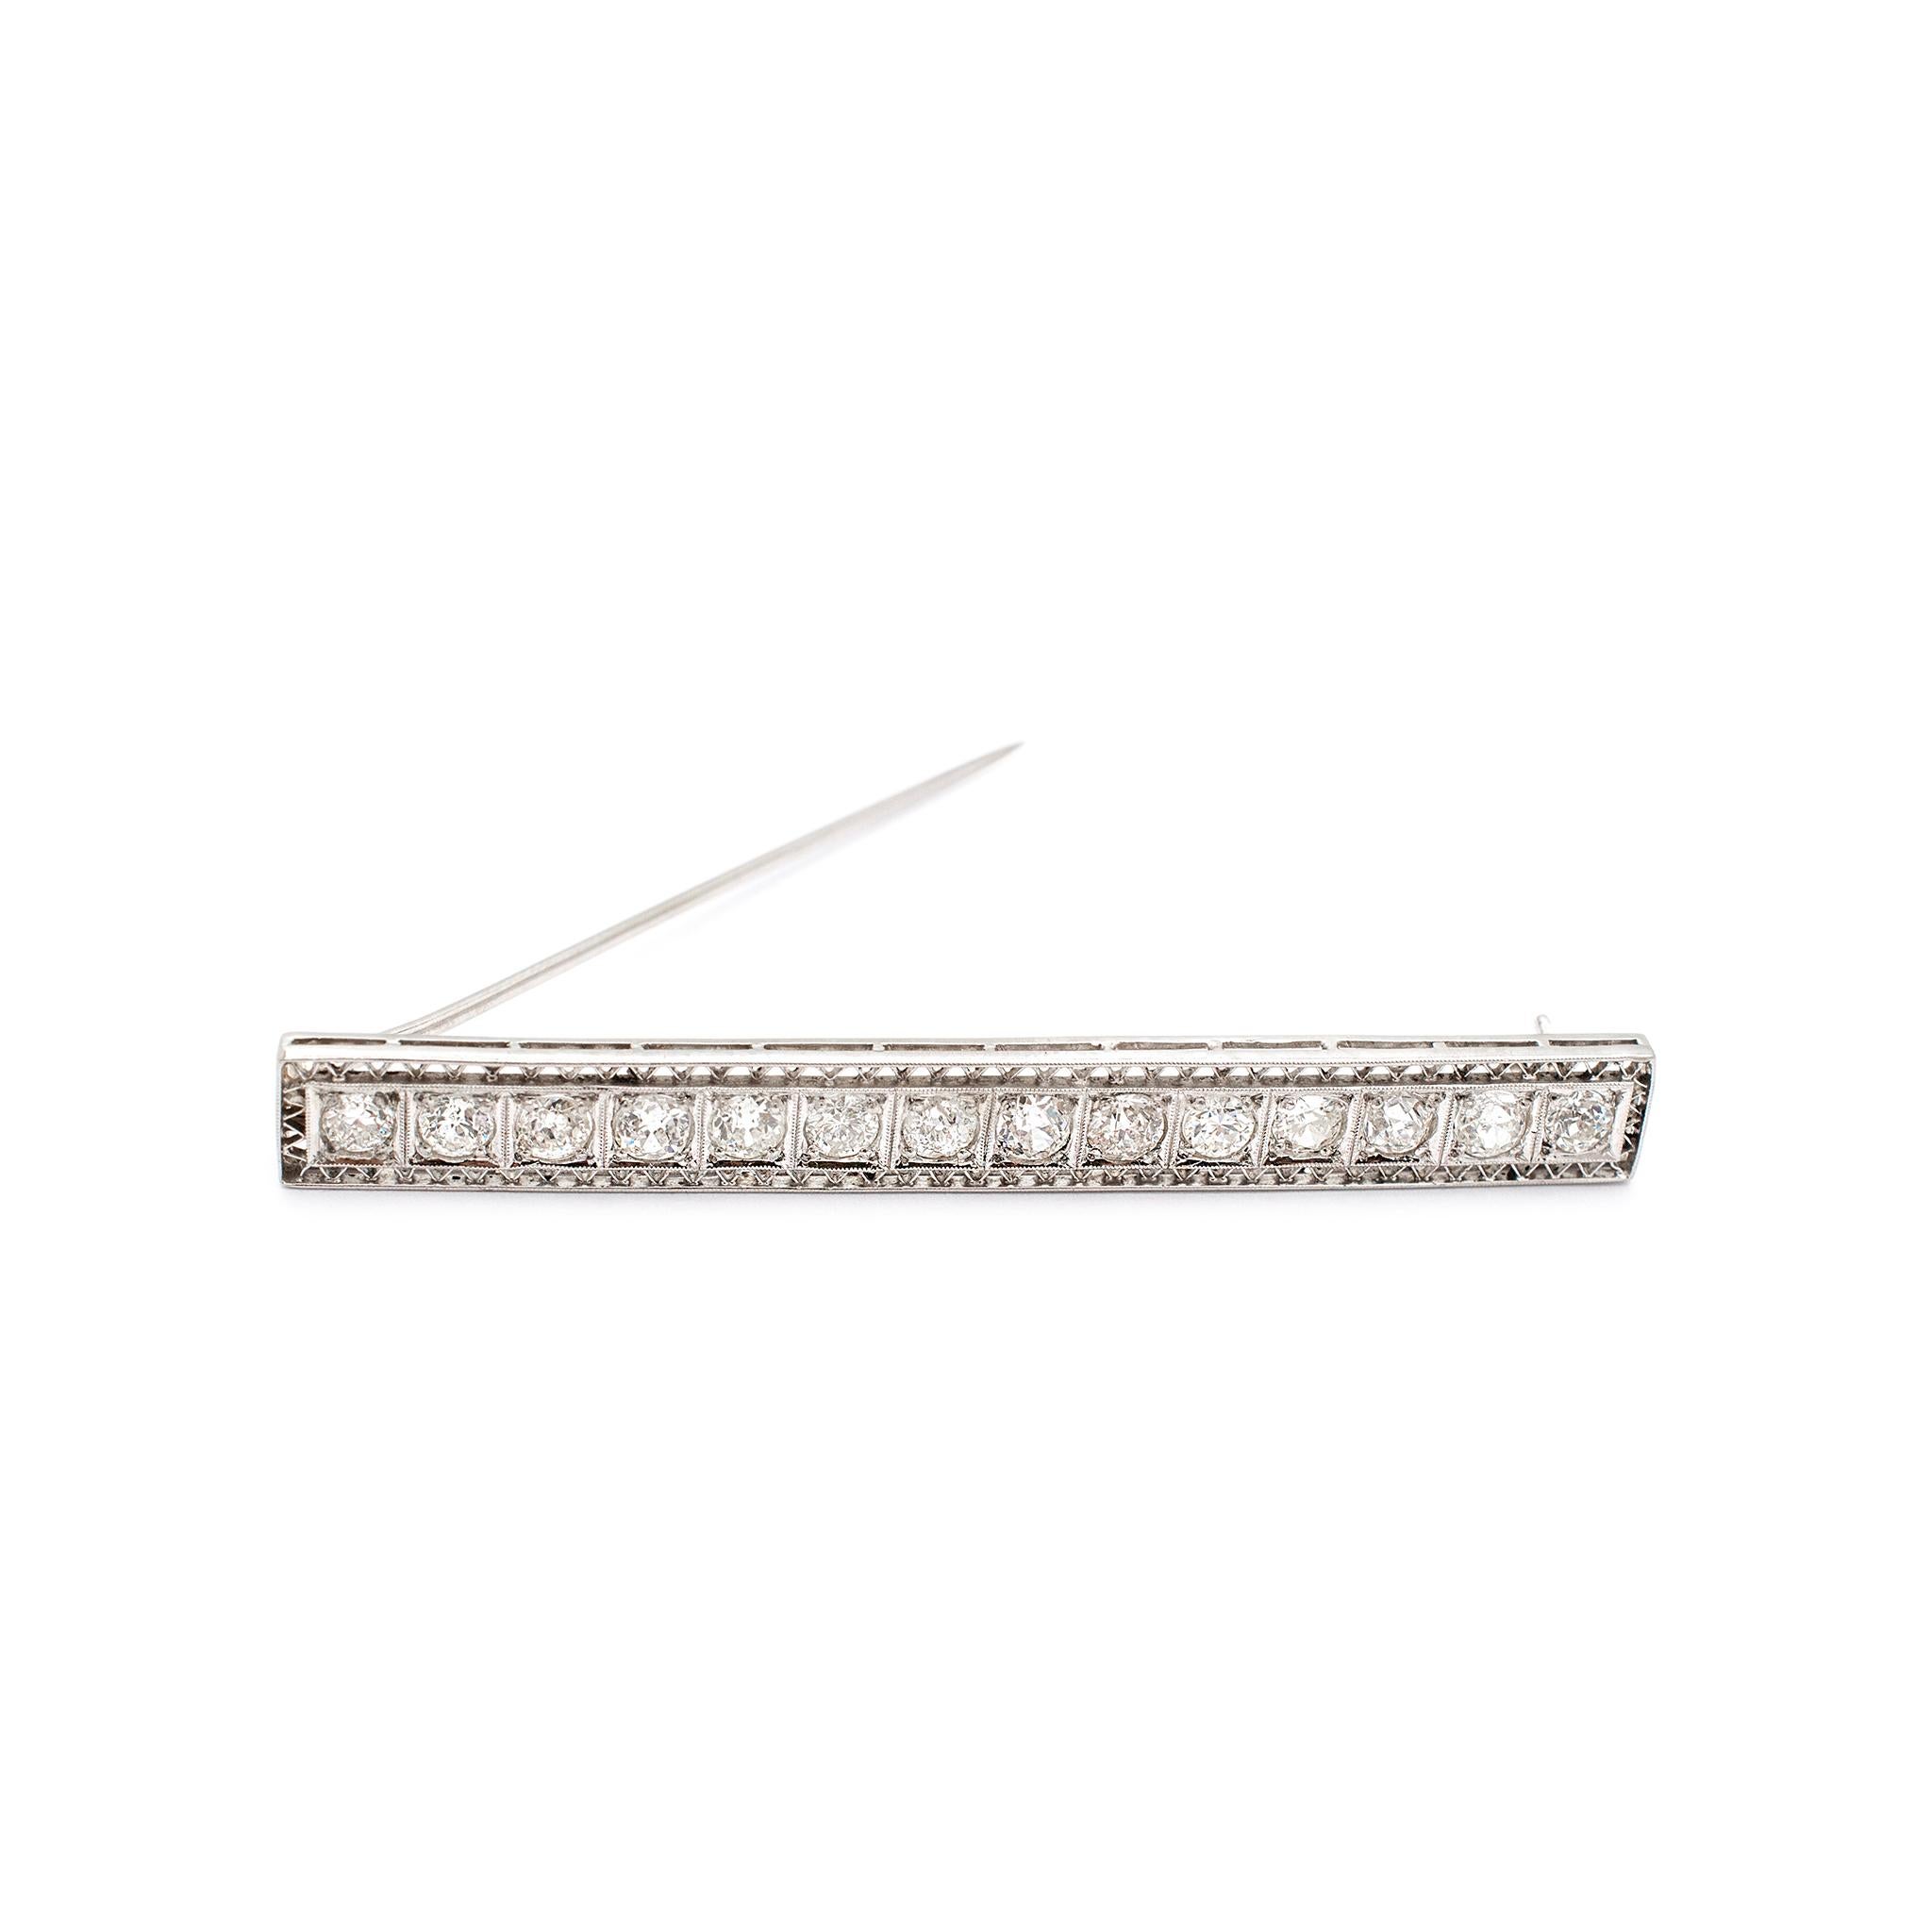 Antique Filigreed Art Deco Platinum & 14K White Gold Diamond Bar Brooch In Excellent Condition For Sale In Houston, TX